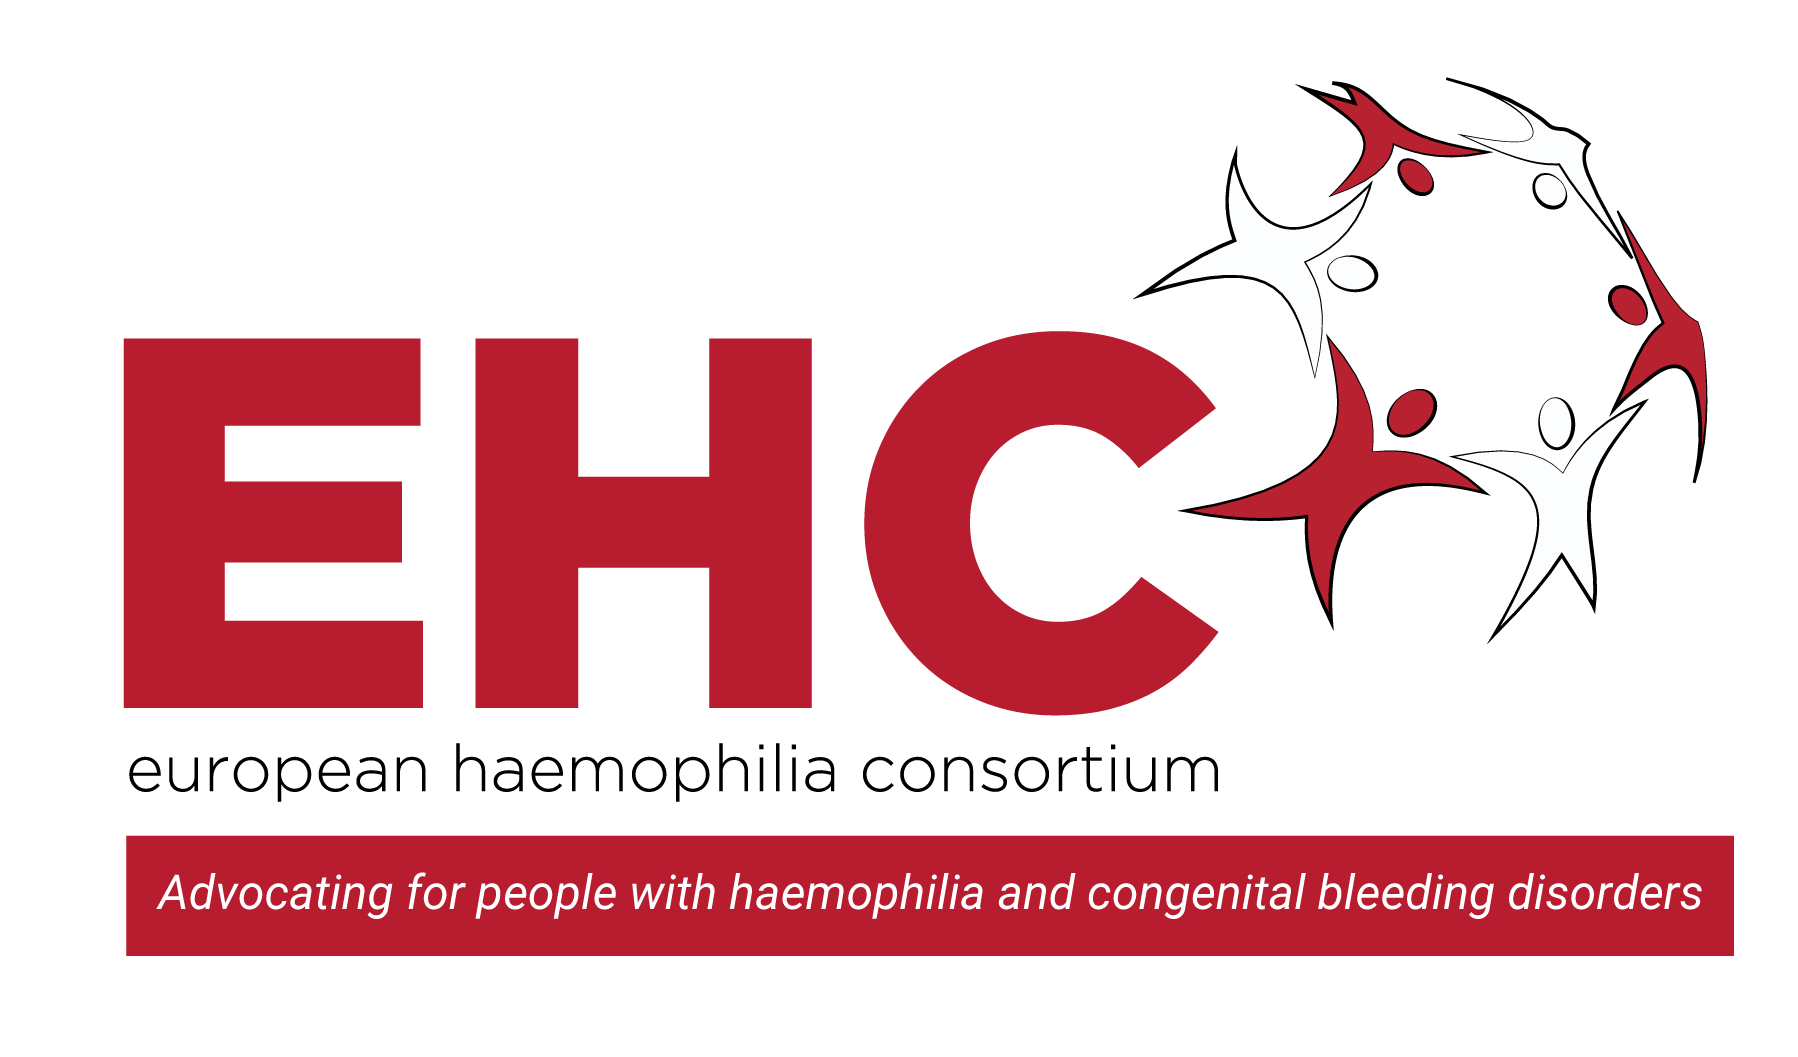 EHC – European Haemophilia Consortium - Advocating for people with haemophilia and congenital bleeding disorders - /news-in-memoriam-of-dr-theis-bacher-2/